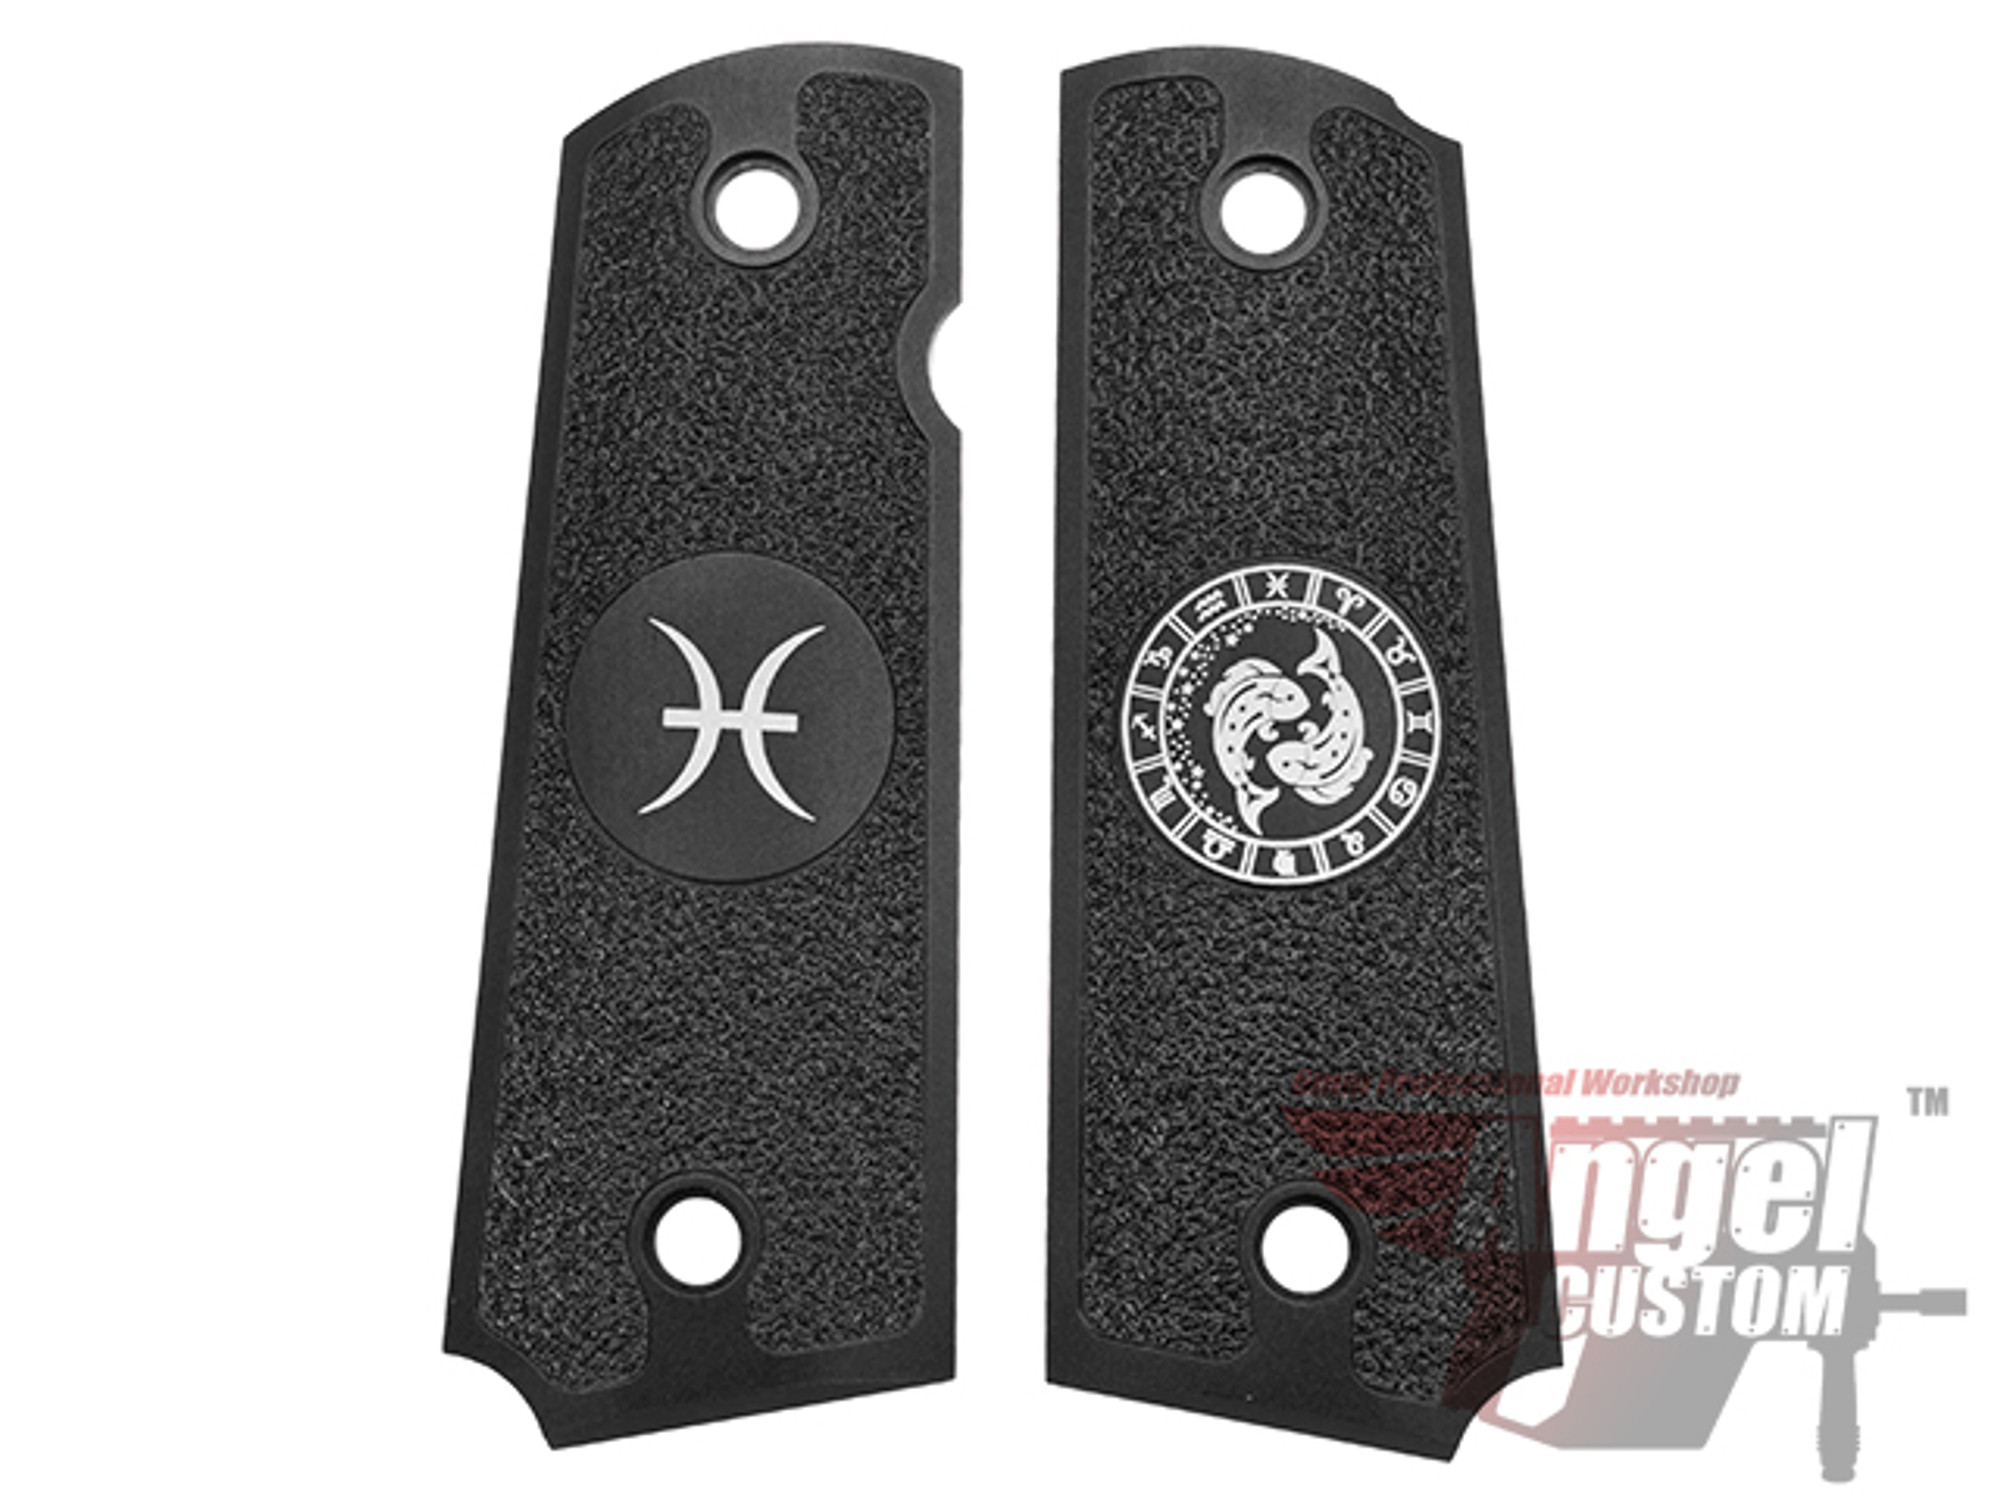 Angel Custom CNC Machined Tac-Glove "Zodiac" Grips for Tokyo Marui/KWA/Western Arms 1911 Series Airsoft Pistols - Pisces (Black)